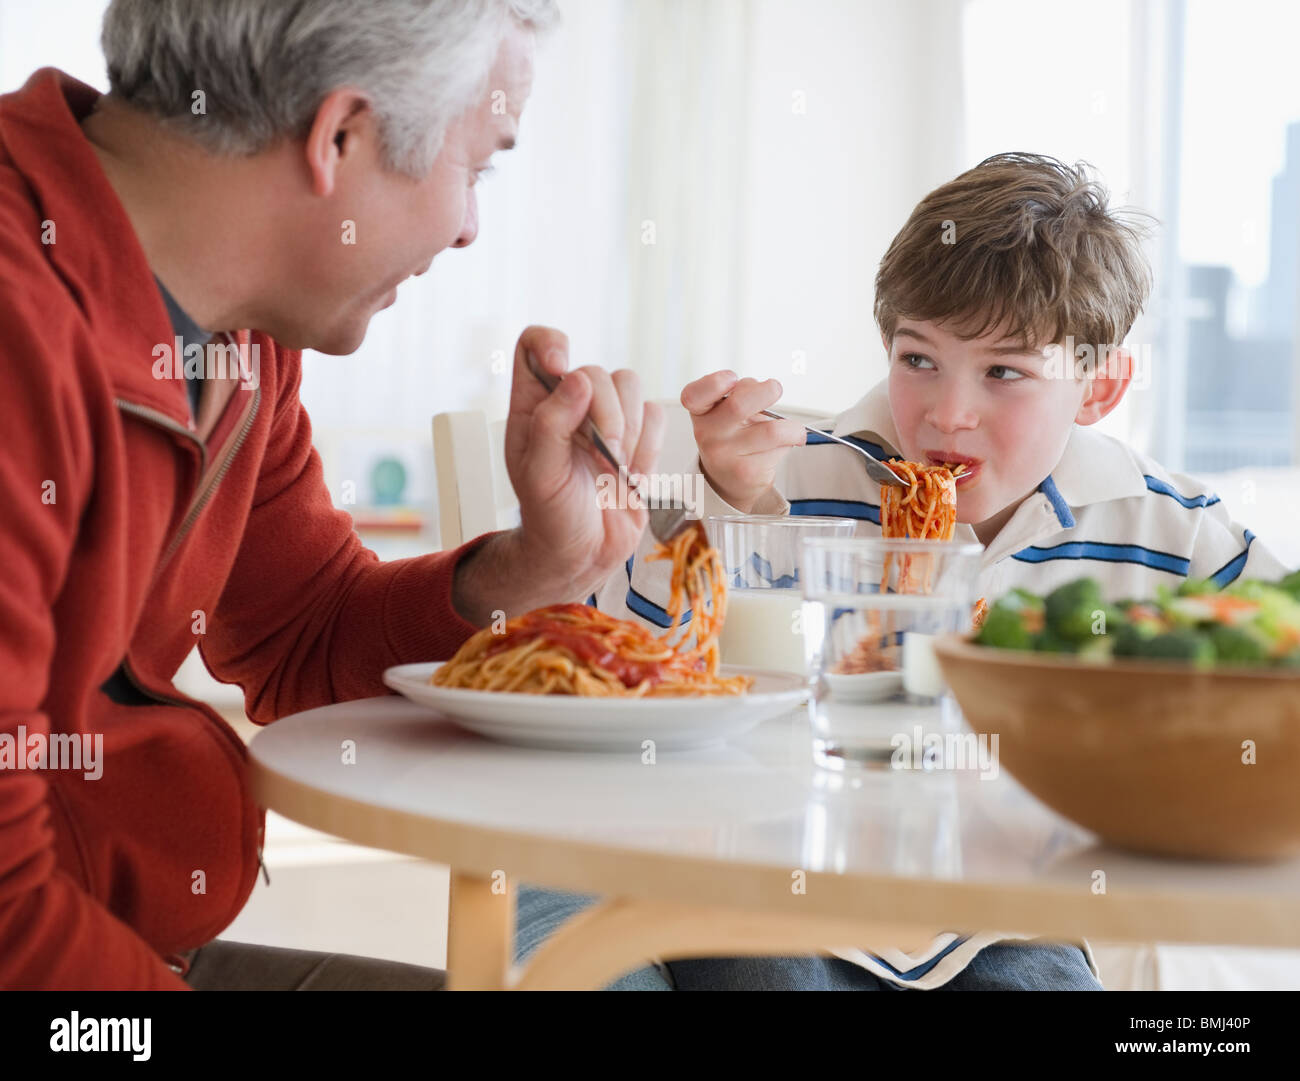 Father and son eating spaghetti Stock Photo